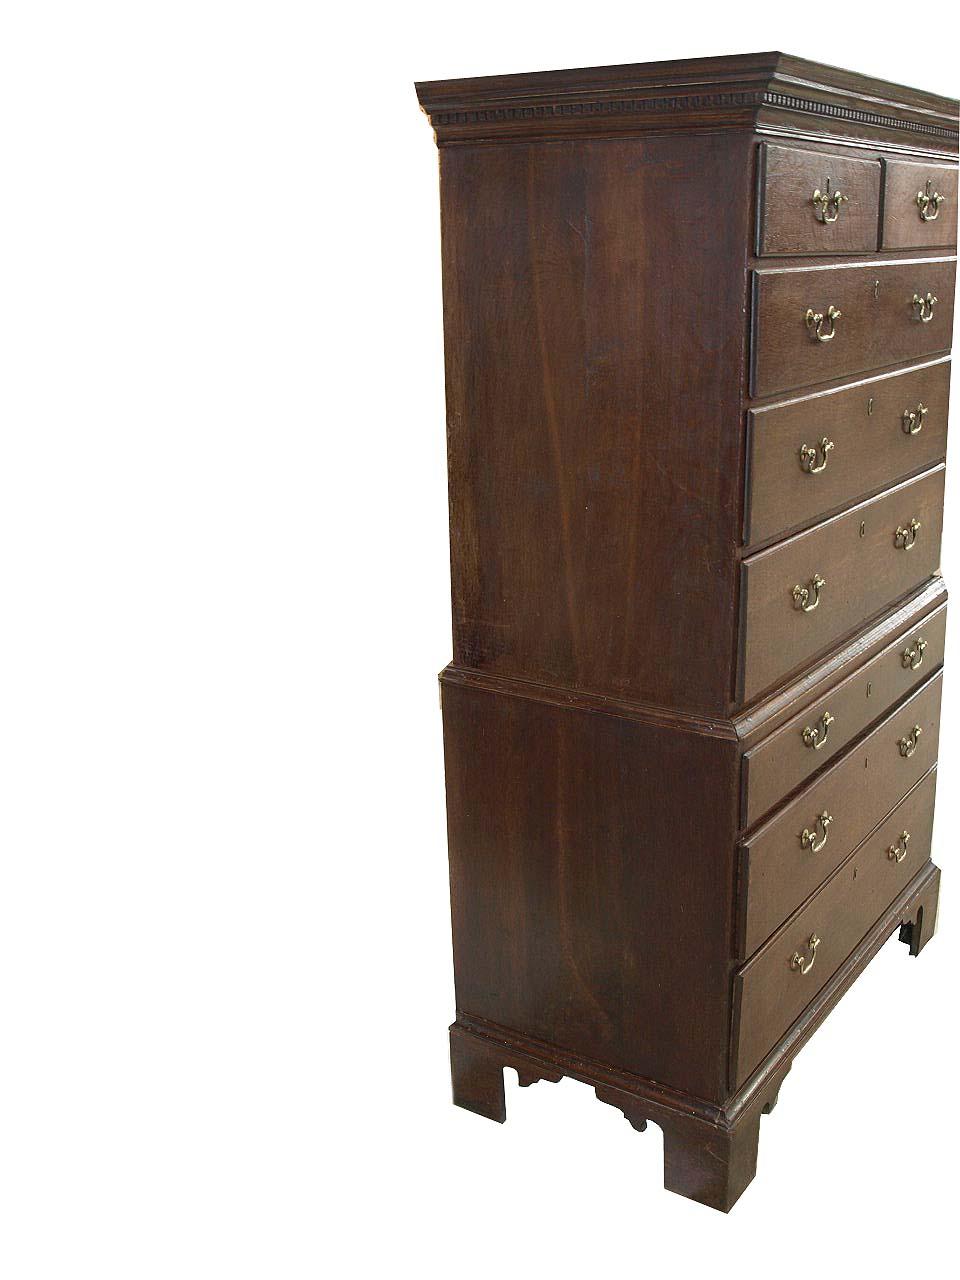 English Chippendale oak chest on chest, the cove cornice with dentil molding, the '' overlapping'' (as opposed to cock beaded) drawers retain their original swan neck pulls and raised brass insert escutcheons. The nicely shaped bracket feet are also